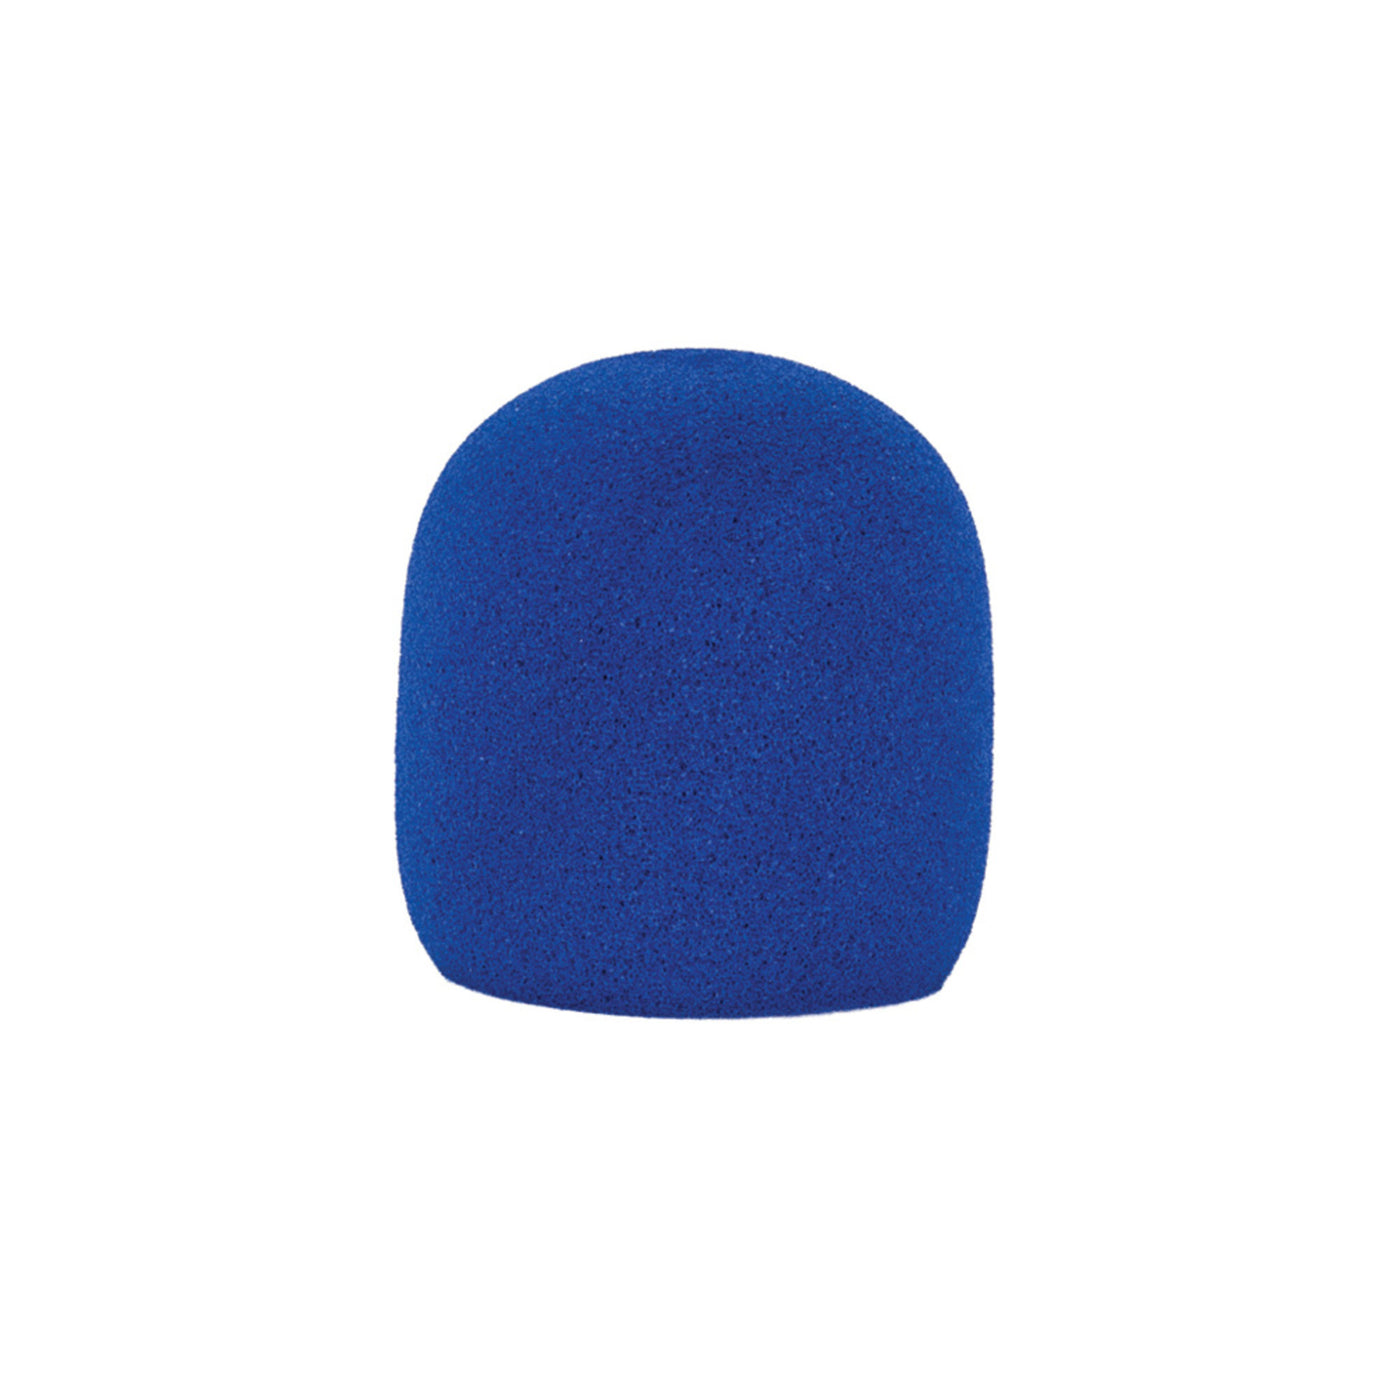 Nomad Microphone Wind Screen for Round Ball, Blue (NMW-J01U)